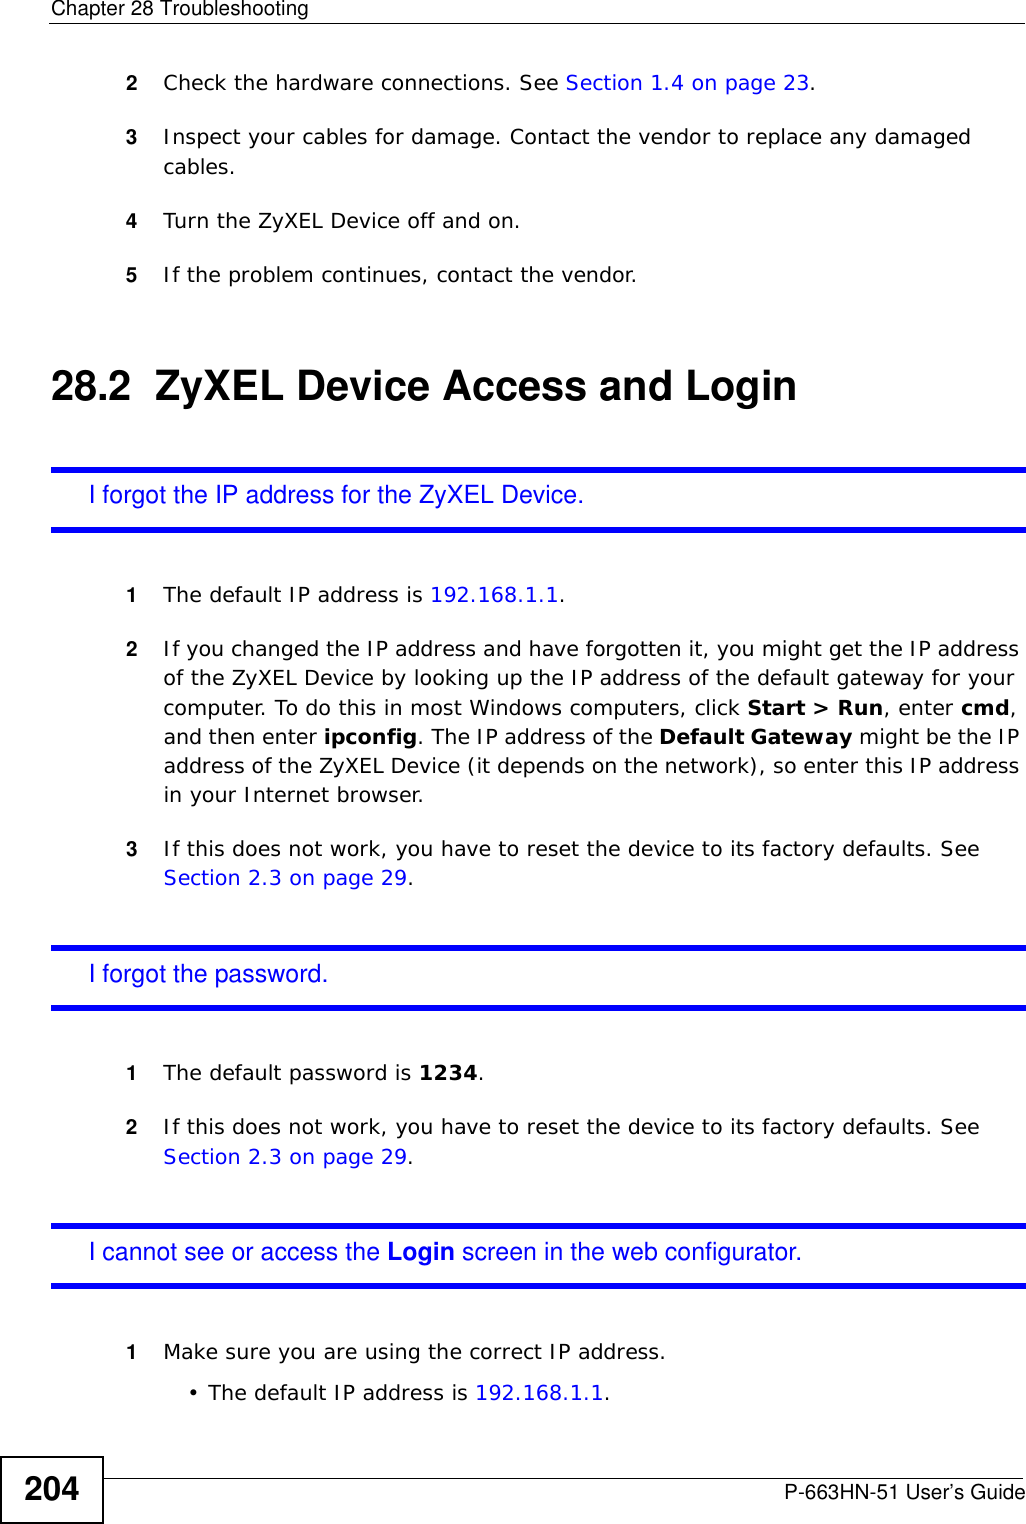 Chapter 28 TroubleshootingP-663HN-51 User’s Guide2042Check the hardware connections. See Section 1.4 on page 23.3Inspect your cables for damage. Contact the vendor to replace any damaged cables.4Turn the ZyXEL Device off and on.5If the problem continues, contact the vendor.28.2  ZyXEL Device Access and LoginI forgot the IP address for the ZyXEL Device.1The default IP address is 192.168.1.1.2If you changed the IP address and have forgotten it, you might get the IP address of the ZyXEL Device by looking up the IP address of the default gateway for your computer. To do this in most Windows computers, click Start &gt; Run, enter cmd, and then enter ipconfig. The IP address of the Default Gateway might be the IP address of the ZyXEL Device (it depends on the network), so enter this IP address in your Internet browser.3If this does not work, you have to reset the device to its factory defaults. See Section 2.3 on page 29.I forgot the password.1The default password is 1234.2If this does not work, you have to reset the device to its factory defaults. See Section 2.3 on page 29.I cannot see or access the Login screen in the web configurator.1Make sure you are using the correct IP address.• The default IP address is 192.168.1.1.